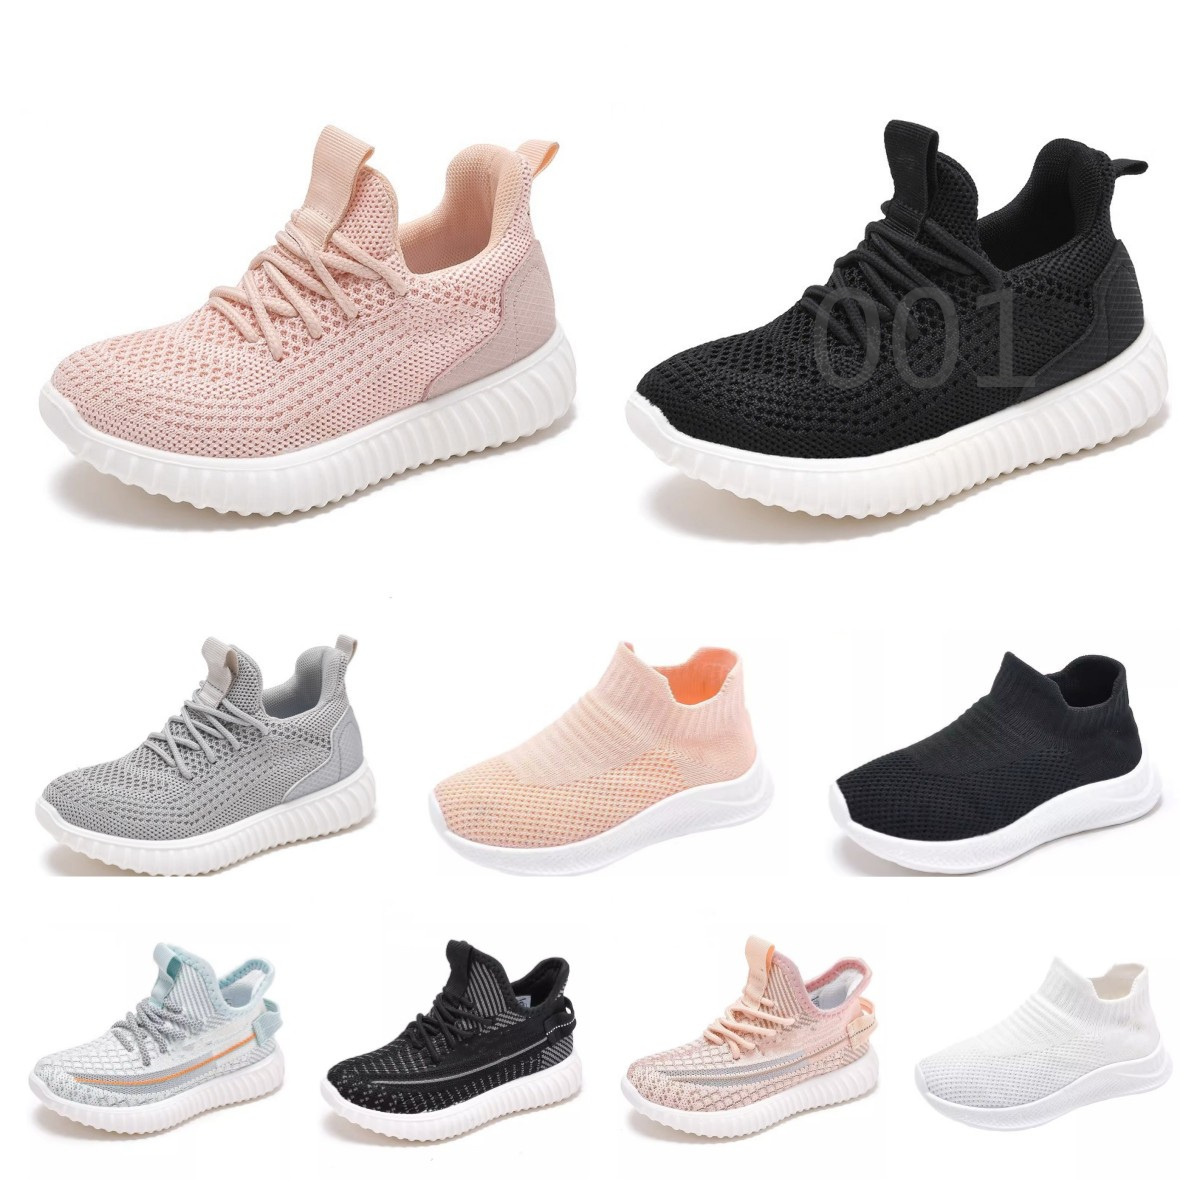 

2023 Tennis Children Lightweight Casual Shoes for Baby Girls Kids Boys Rubber Bottom Antiskid Outdoor Gym Mesh Breathable Sneakers baby outdoor walking 26-35 bb022, Color 02